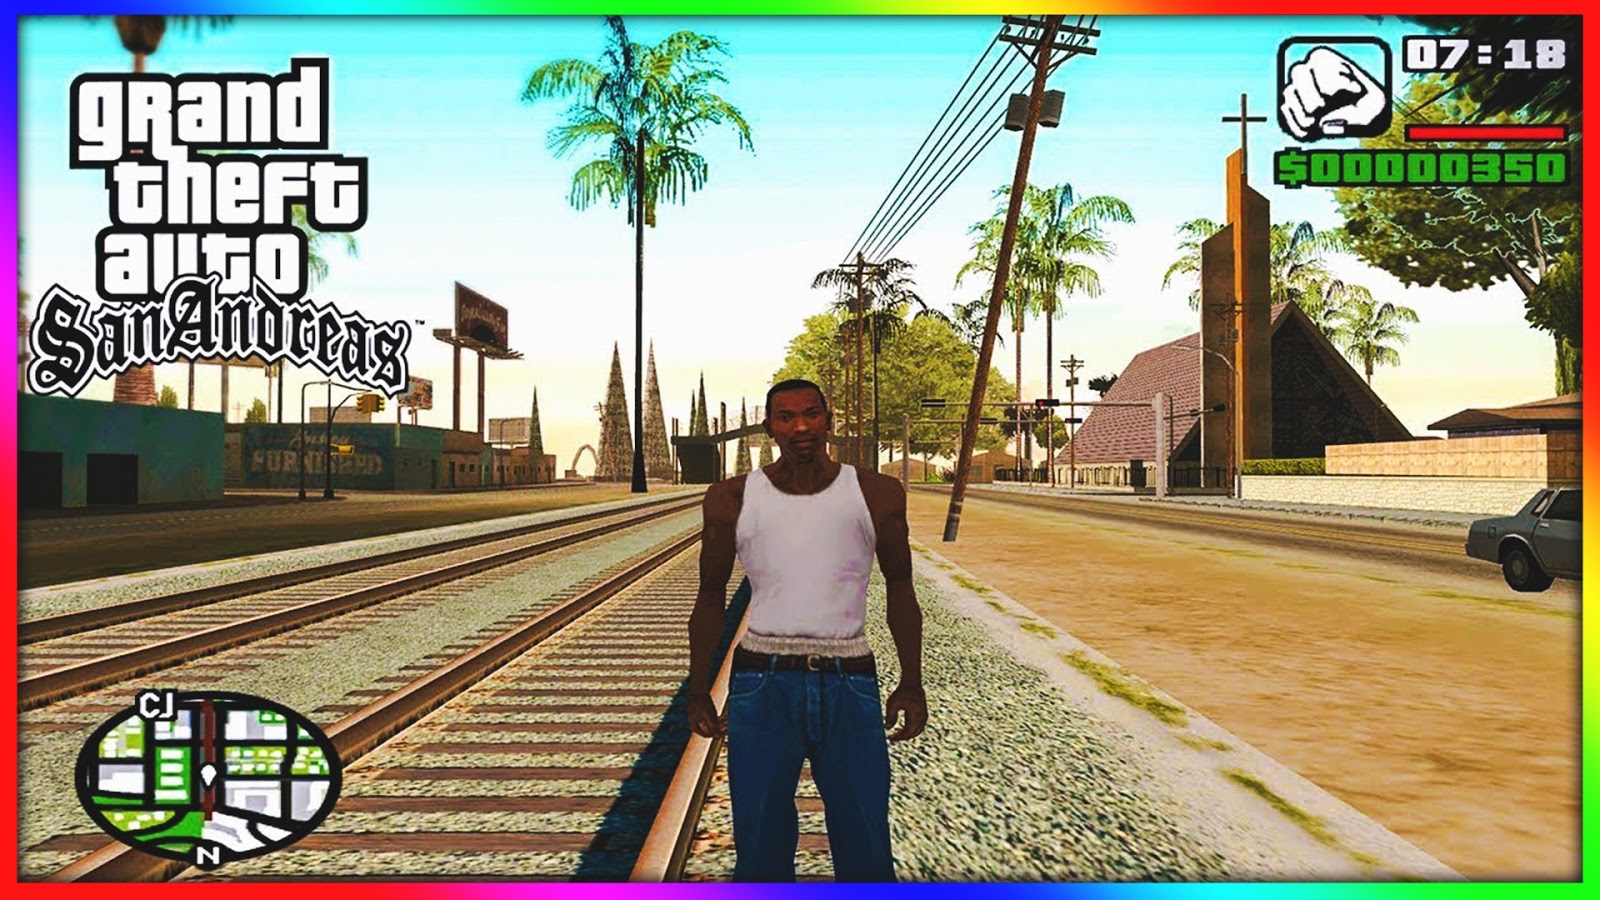 Download GTA SanAndreas APK + DATA | Free Android Game New ... - 